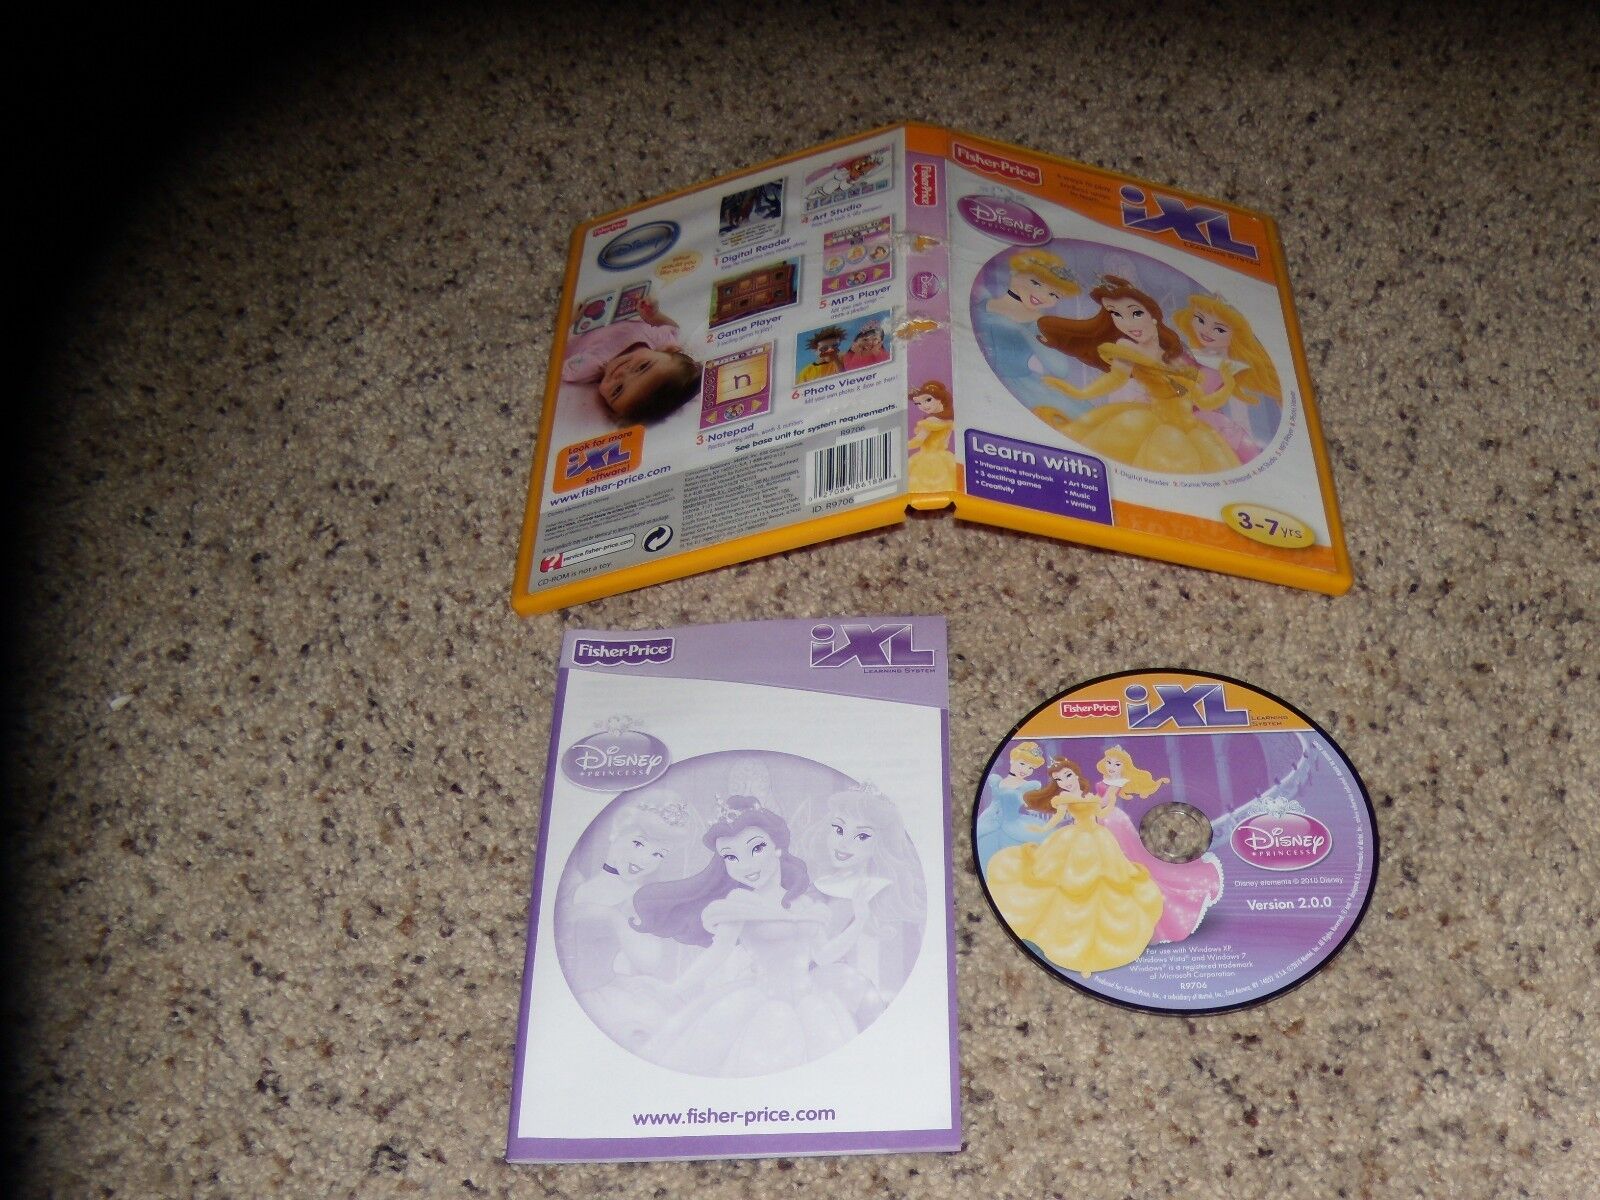 Fisher-Price Disney Princess iXL Learning System disk